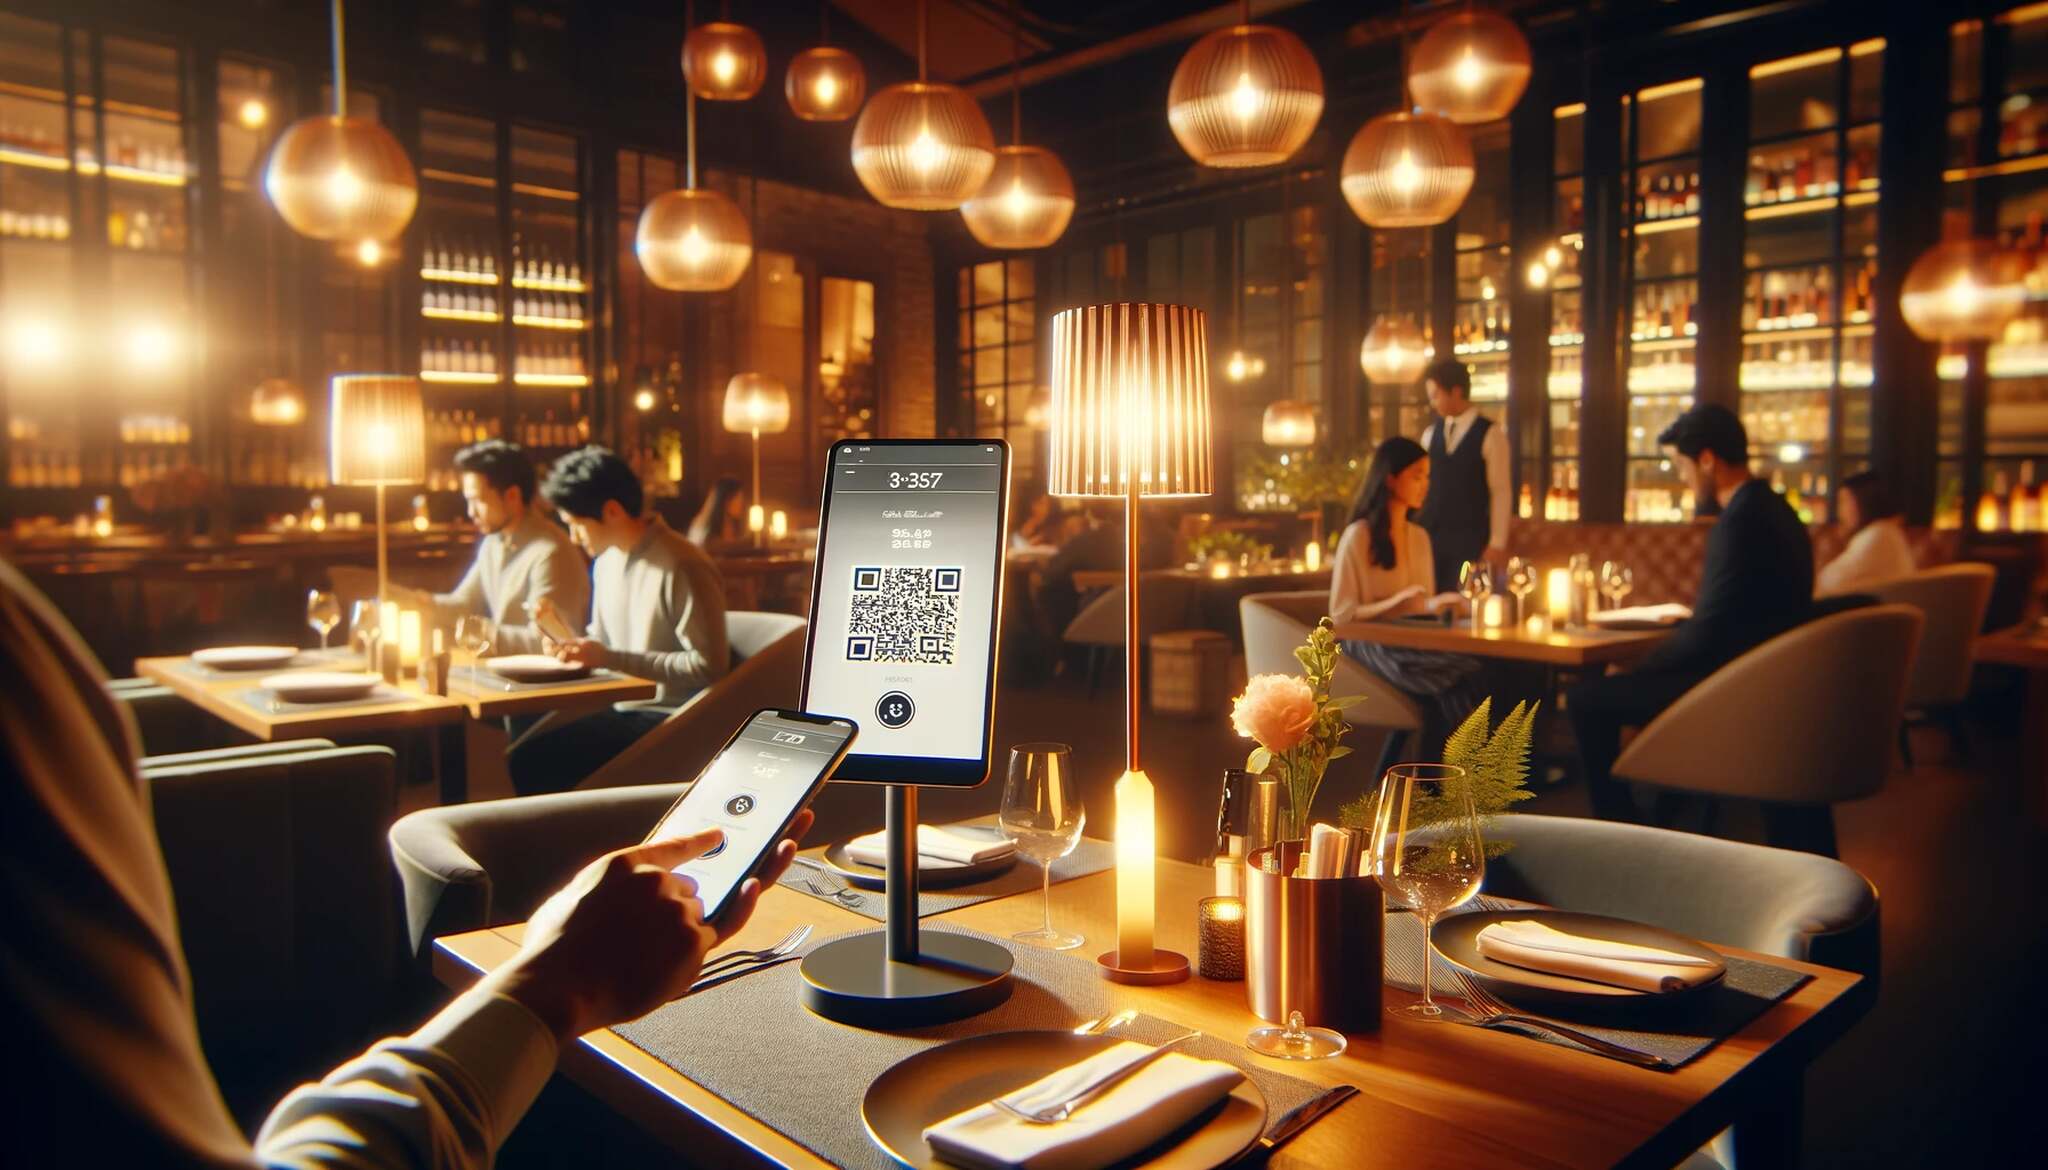 A cozy and modern restaurant interior during the evening, with warm ambient lighting and table with QR code set for dining